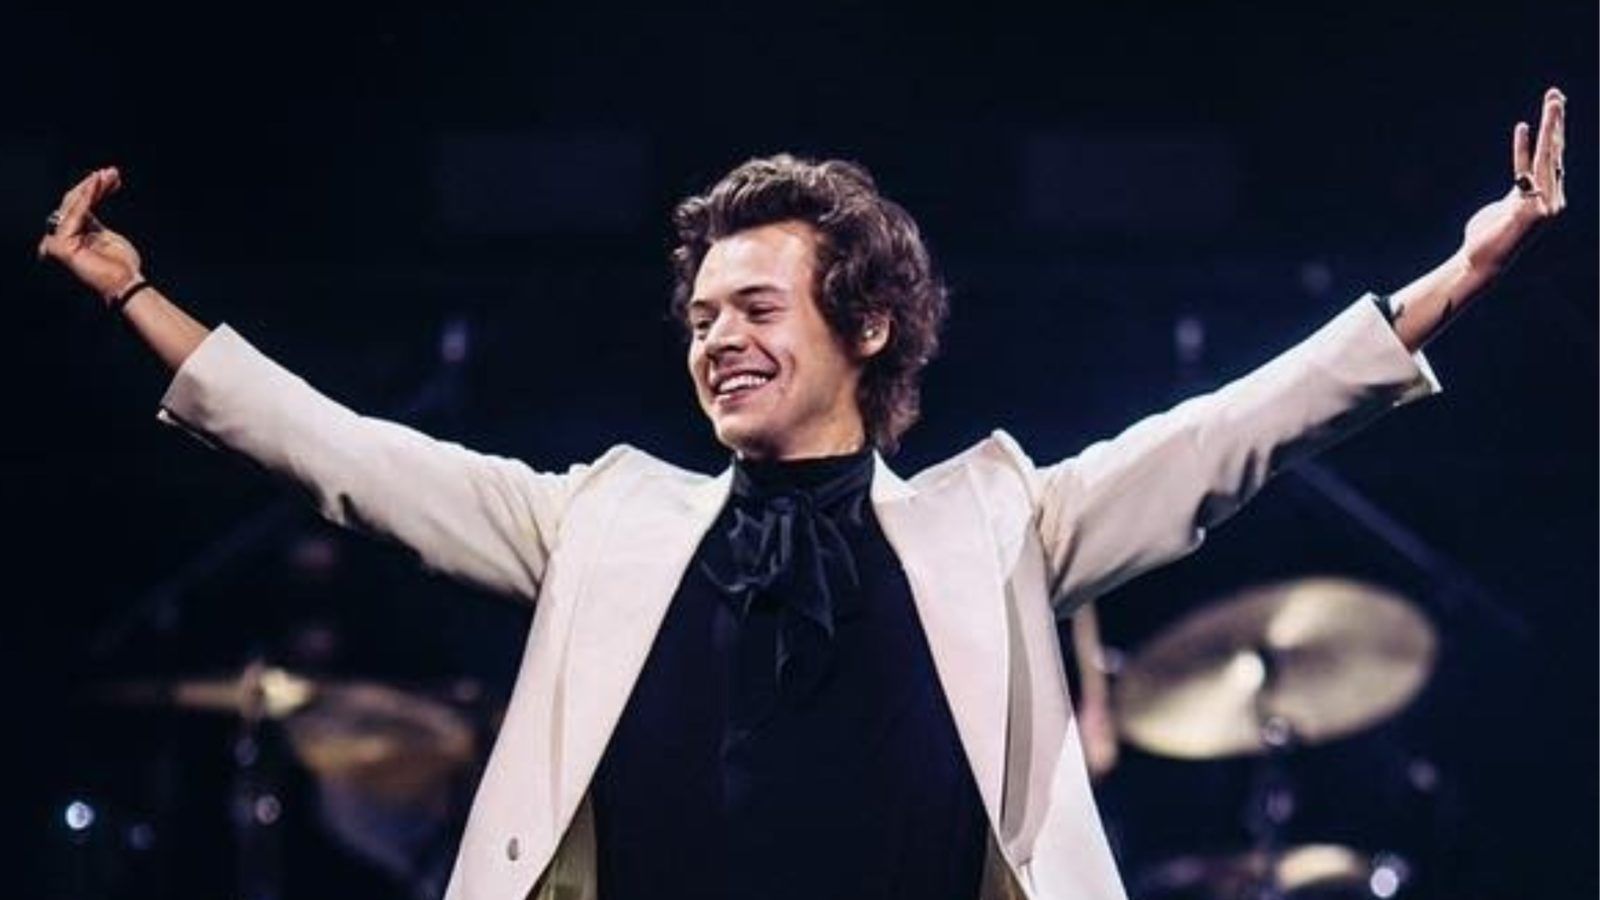 Harry Styles to Release New Album ‘Harry’s House’ in May 2022